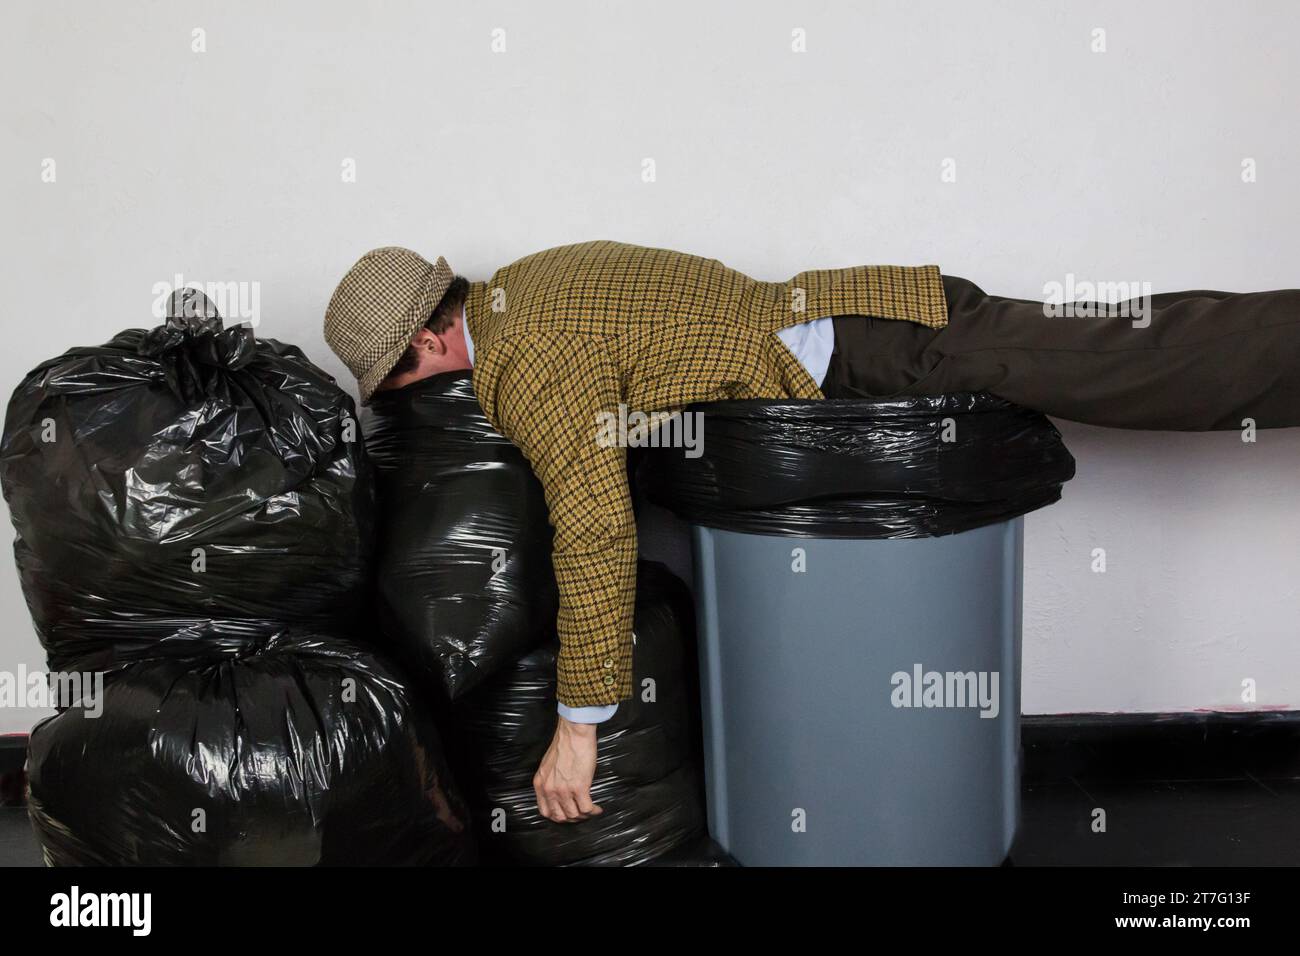 https://c8.alamy.com/comp/2T7G13F/portrait-of-man-in-ugly-suit-lying-atop-trash-can-and-pile-of-trash-bags-concept-of-over-a-barrel-man-thrown-away-2T7G13F.jpg